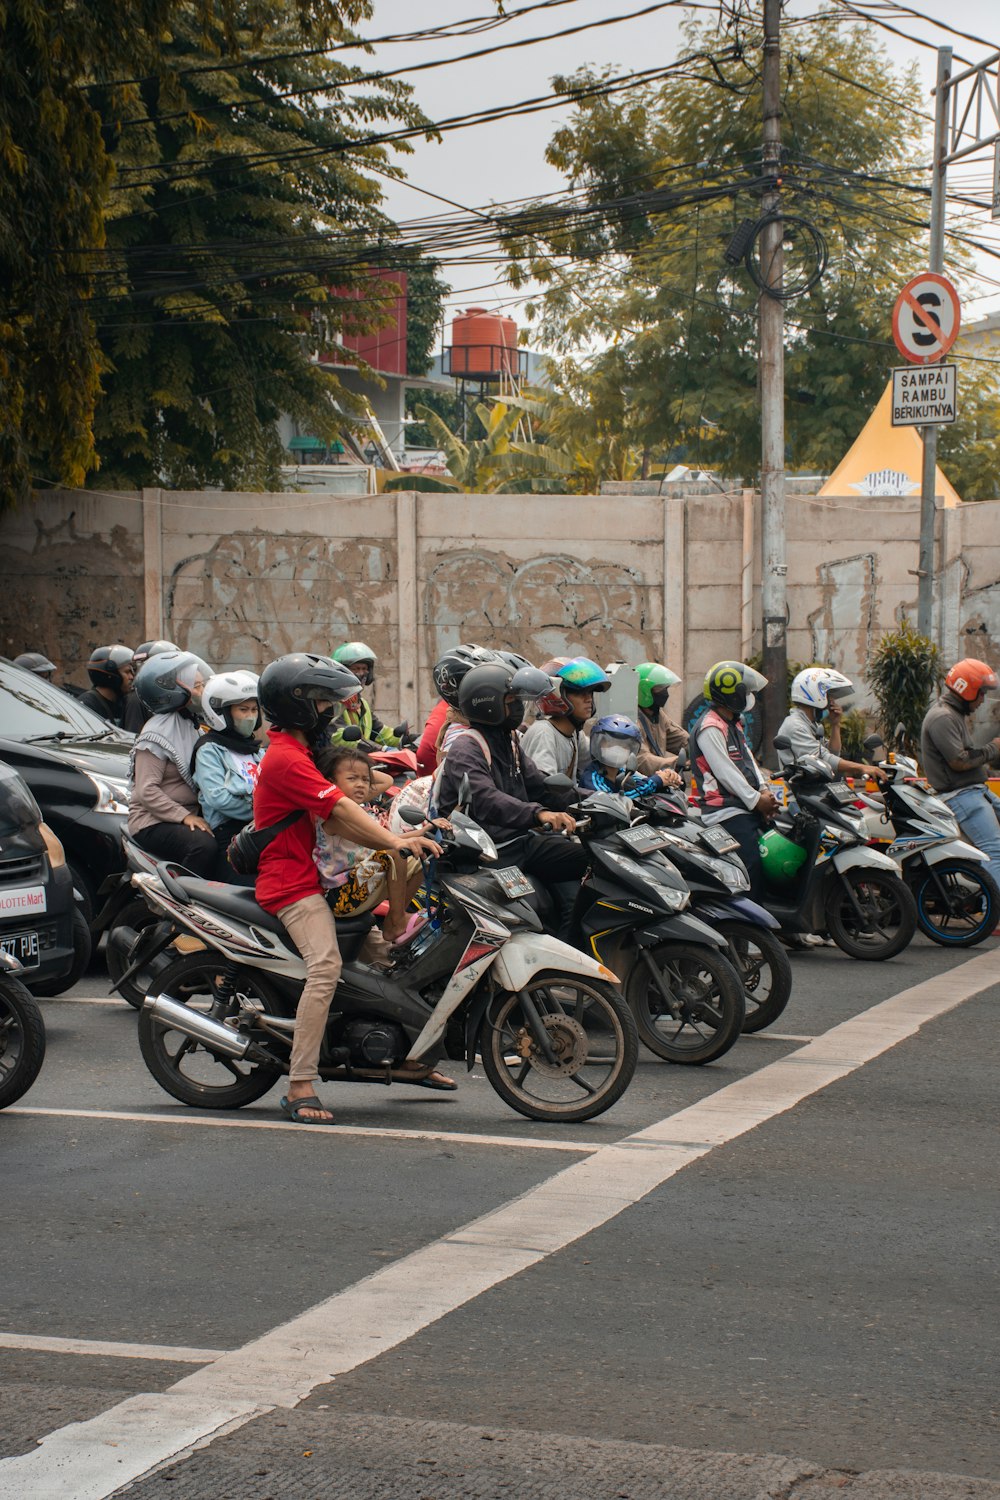 a group of people on motorcycles